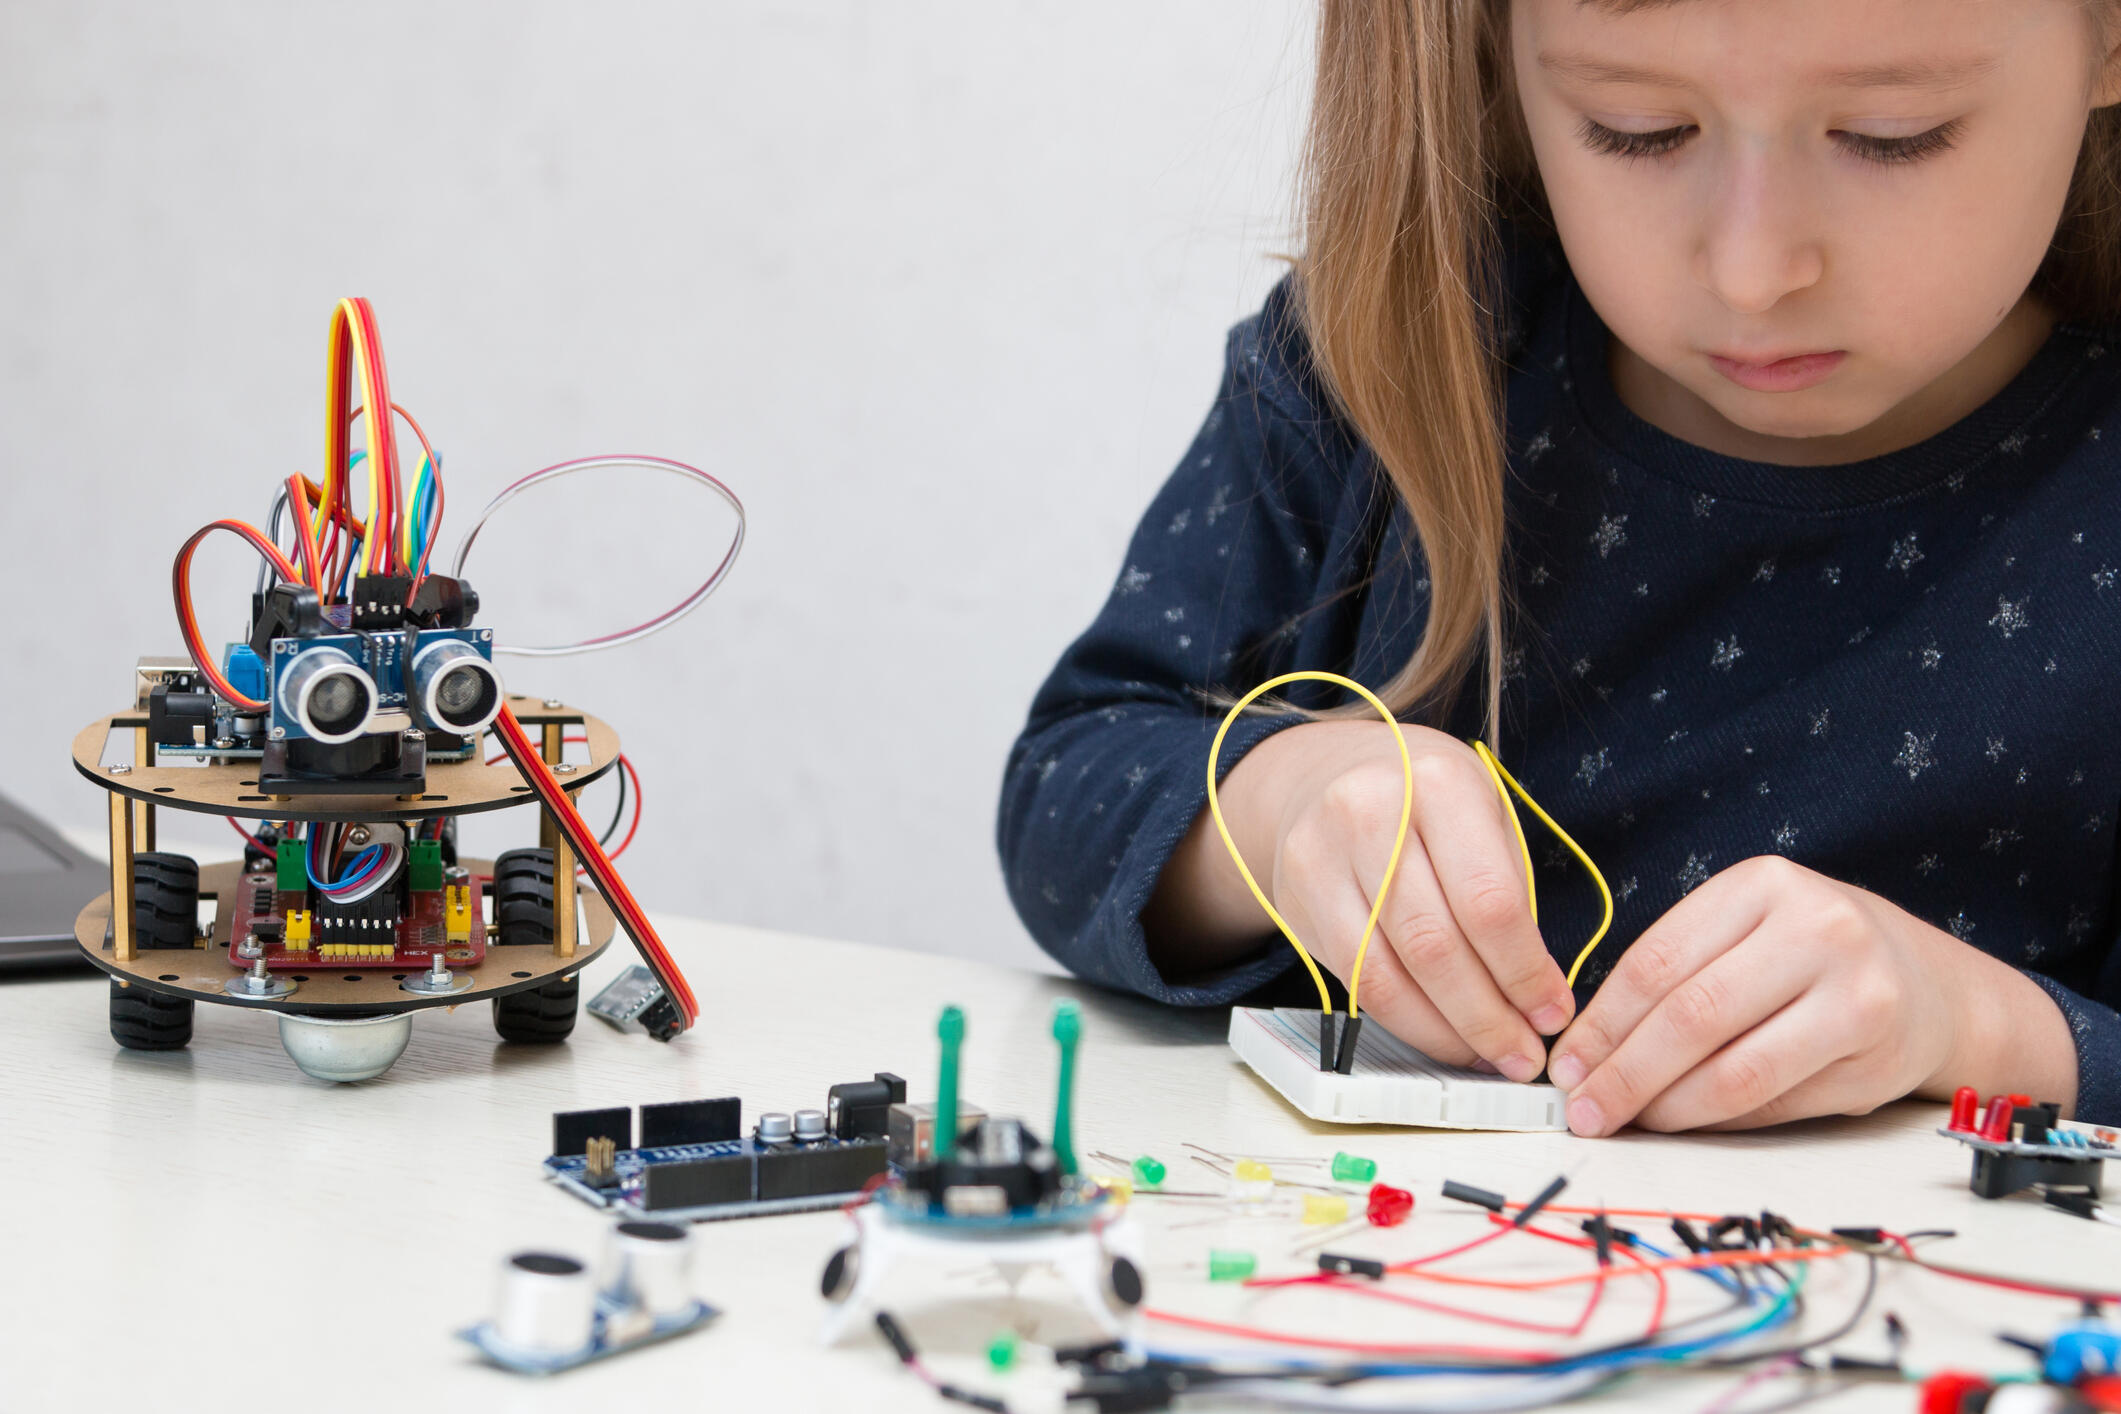 A child playing with an electronic kit.